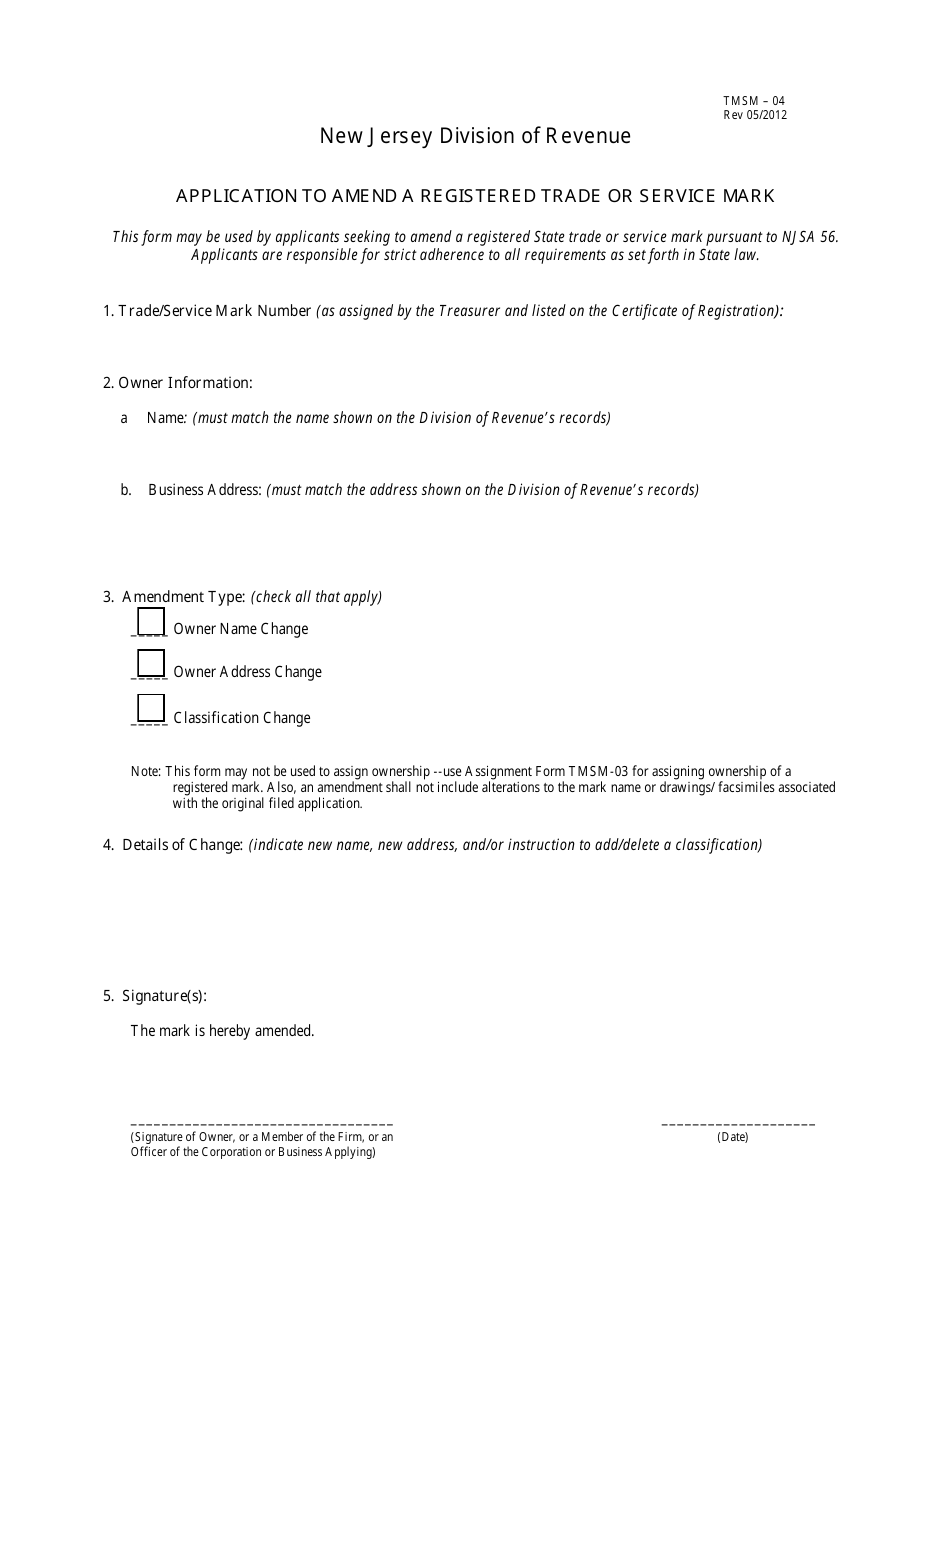 Form TMSM-04 Application to Amend a Registered Trade or Service Mark - New Jersey, Page 1